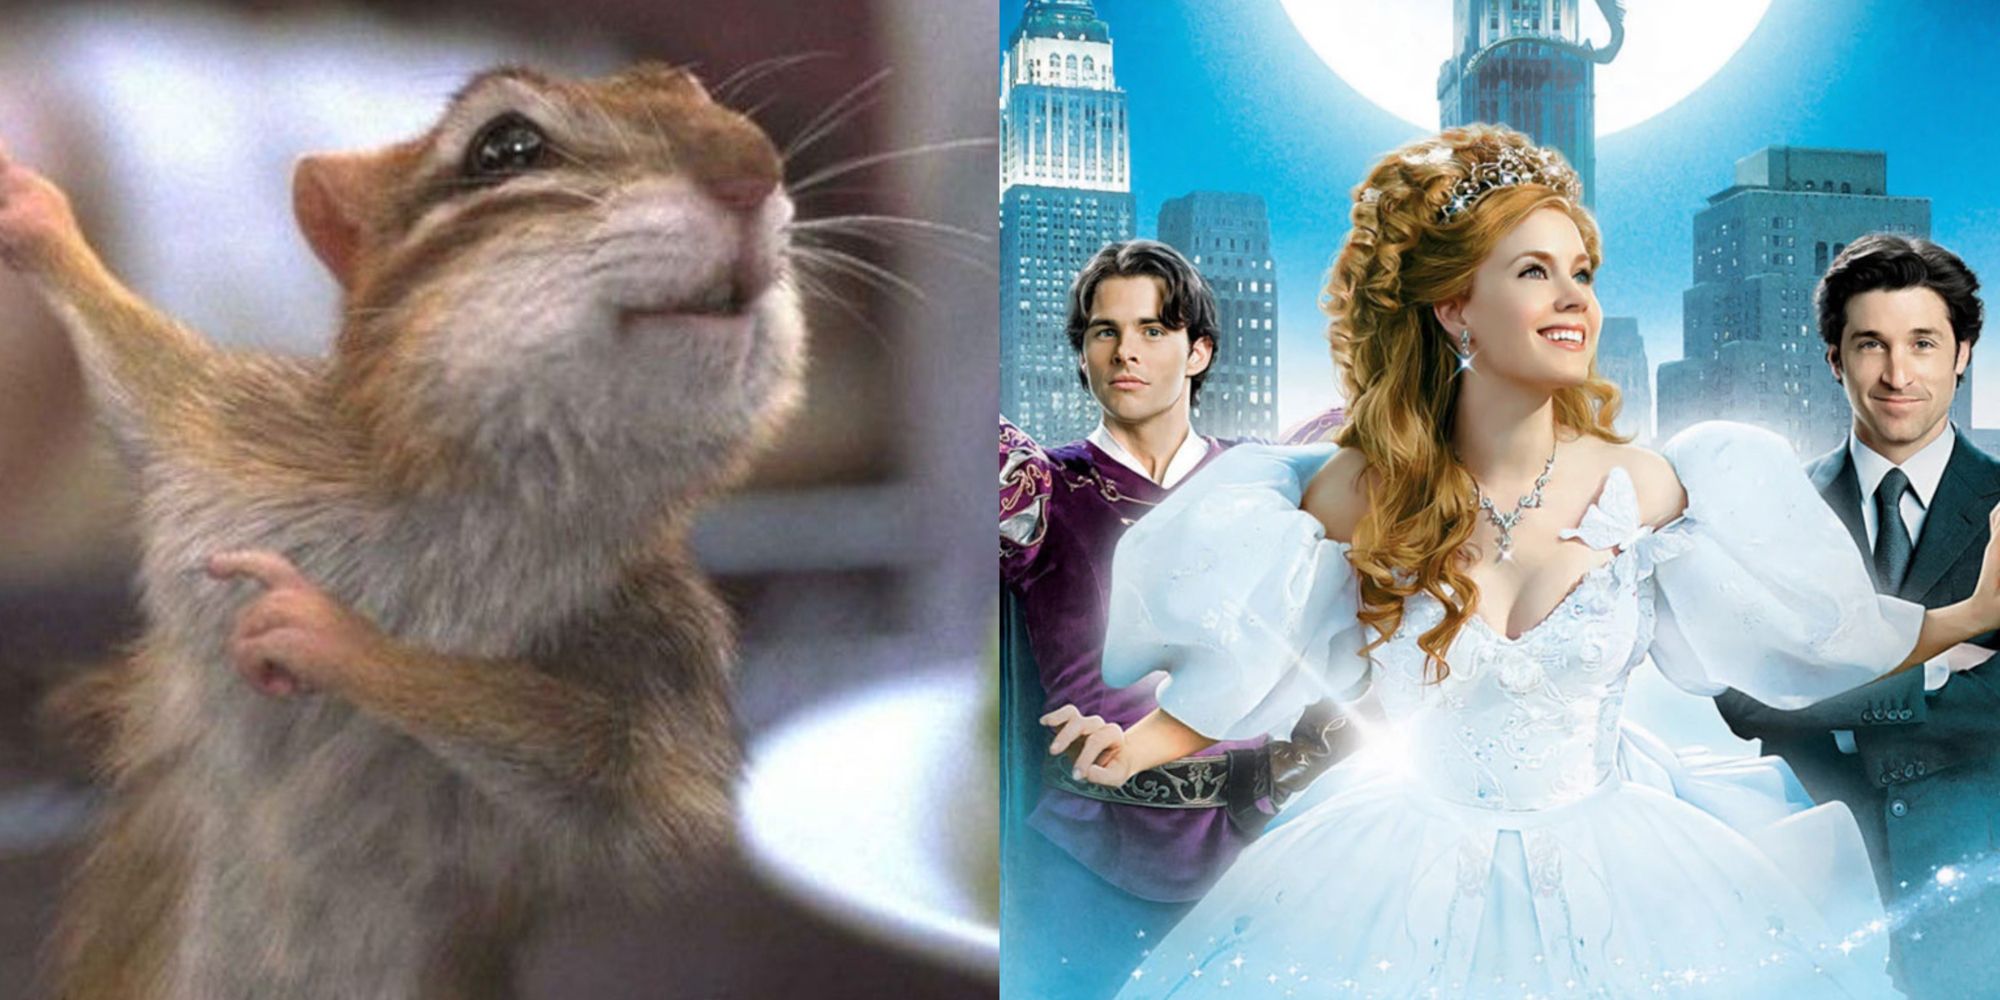 pip pointing at something above him in enchanted and the enchanted poster